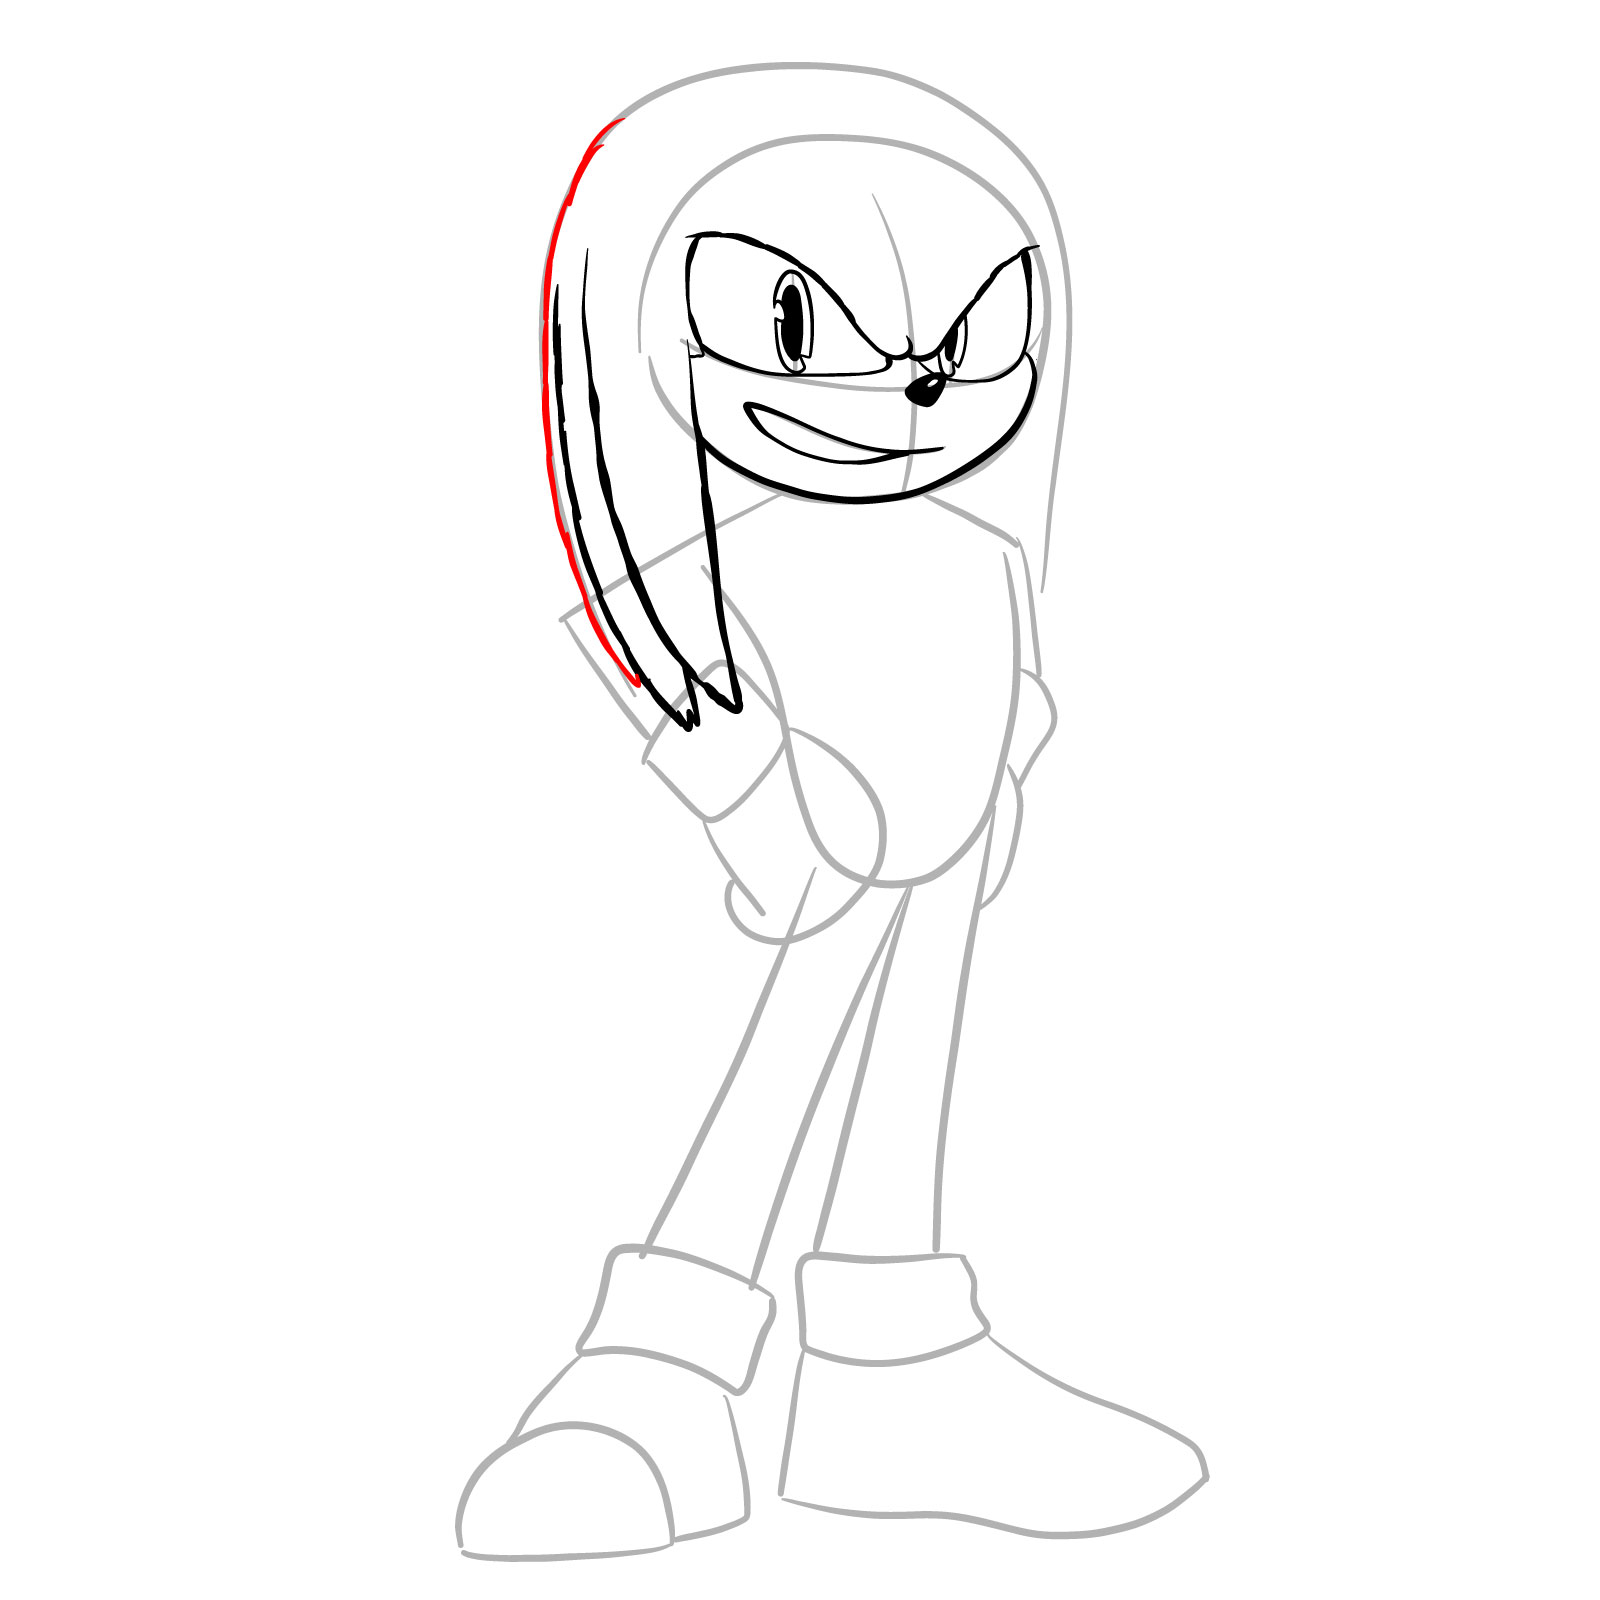 How to draw Knuckles from the movie - step 11